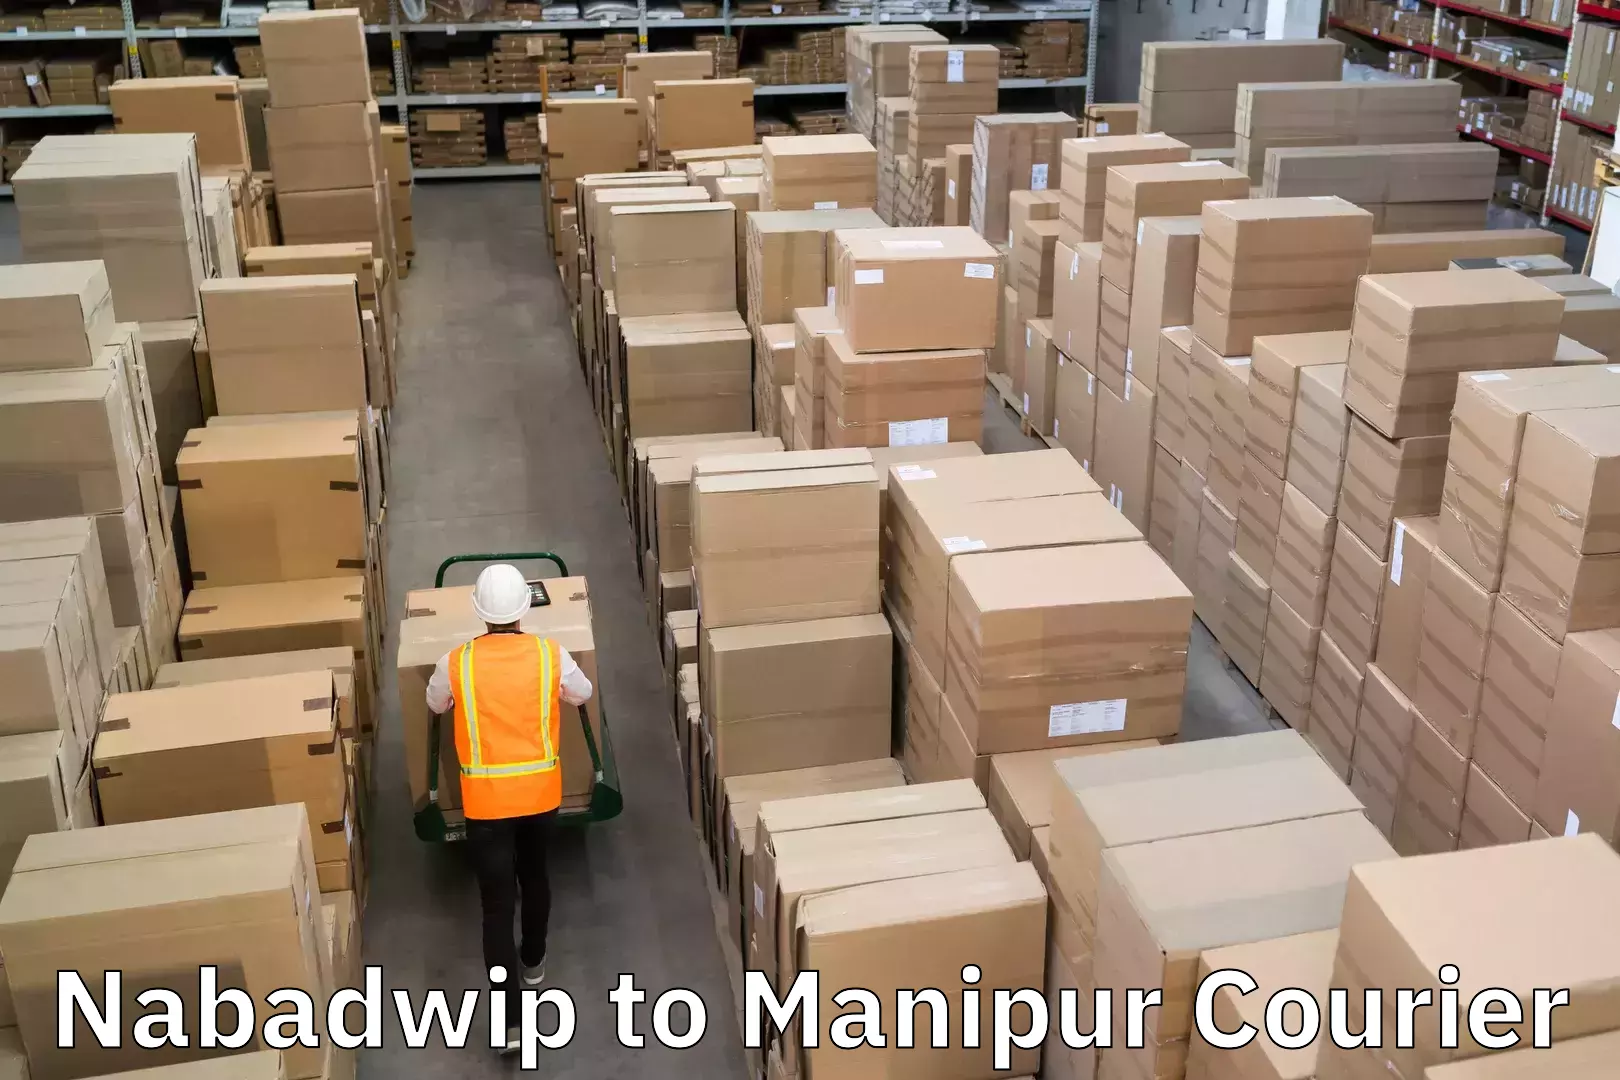 Express delivery network Nabadwip to Manipur